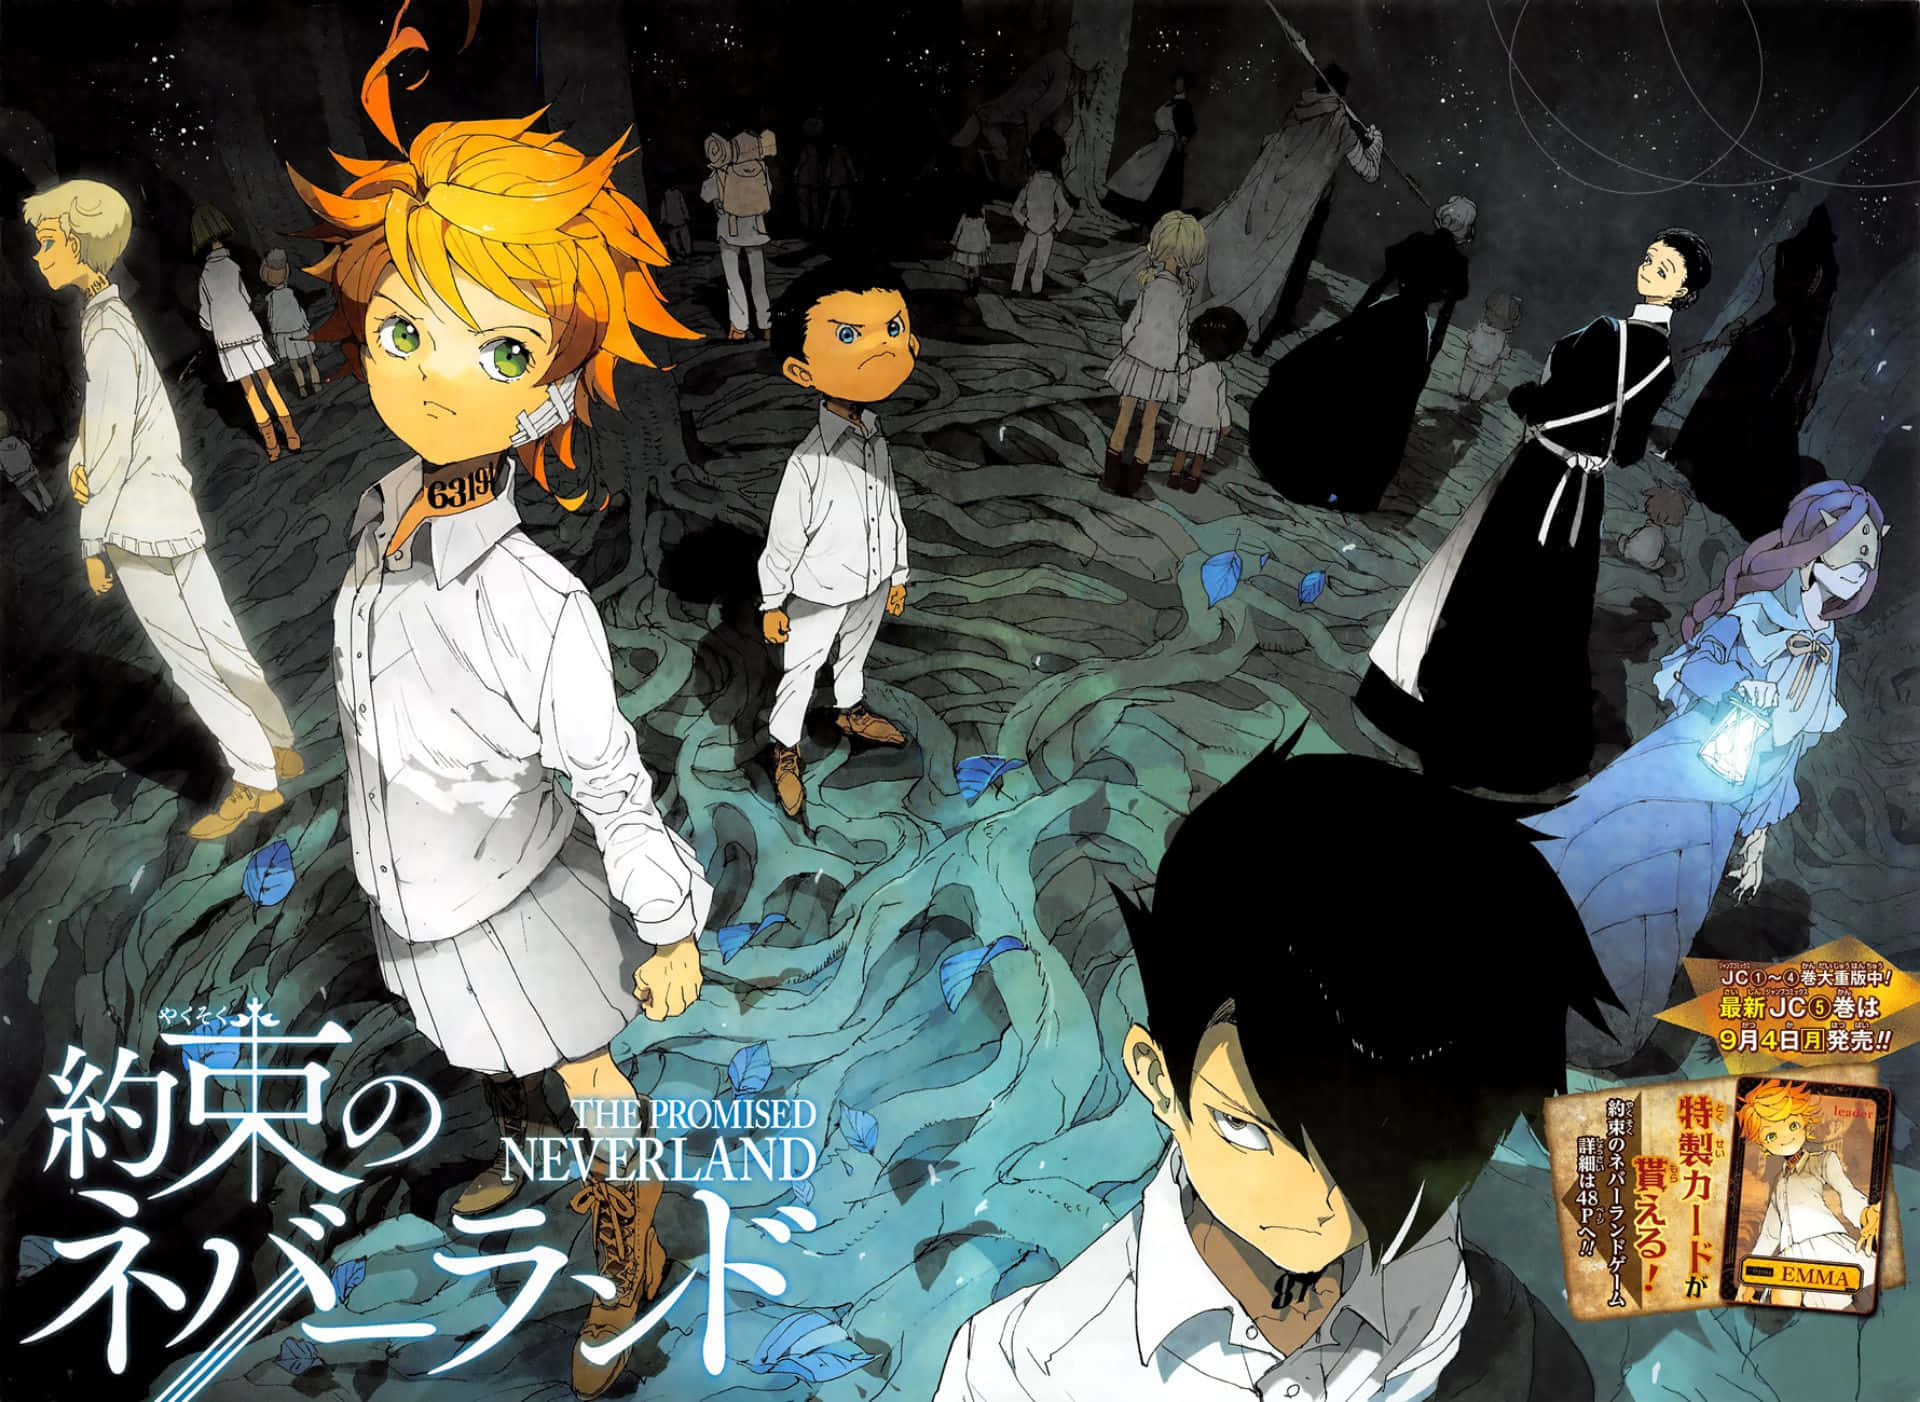 Caption: Mujika with her enchanting smile from The Promised Neverland Wallpaper